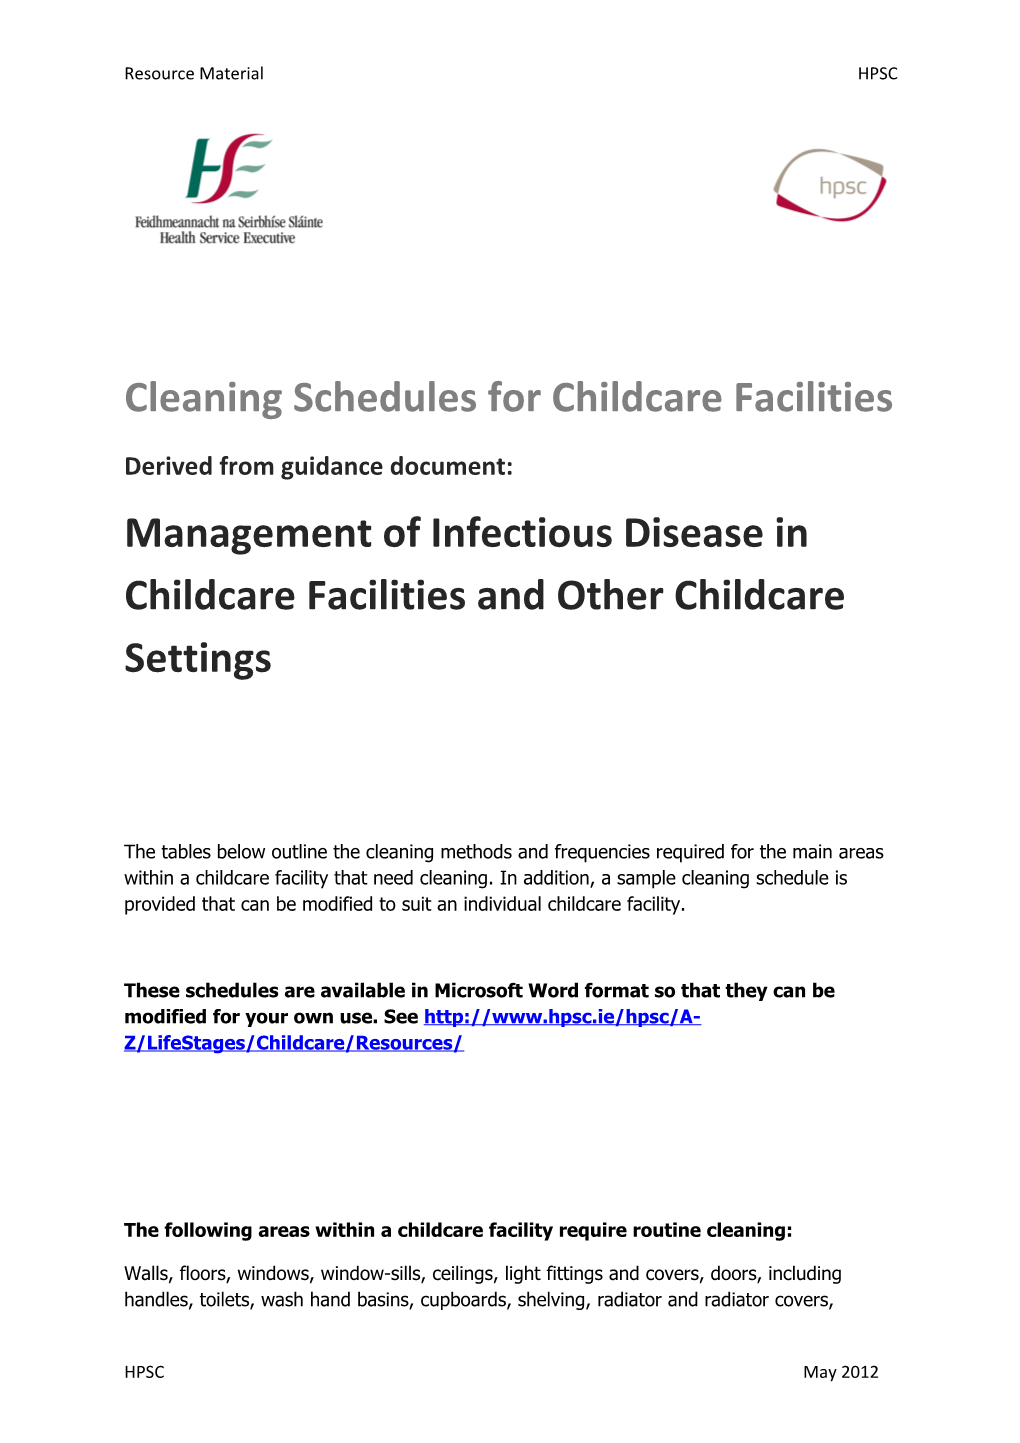 Cleaning Schedules for Childcare Facilities